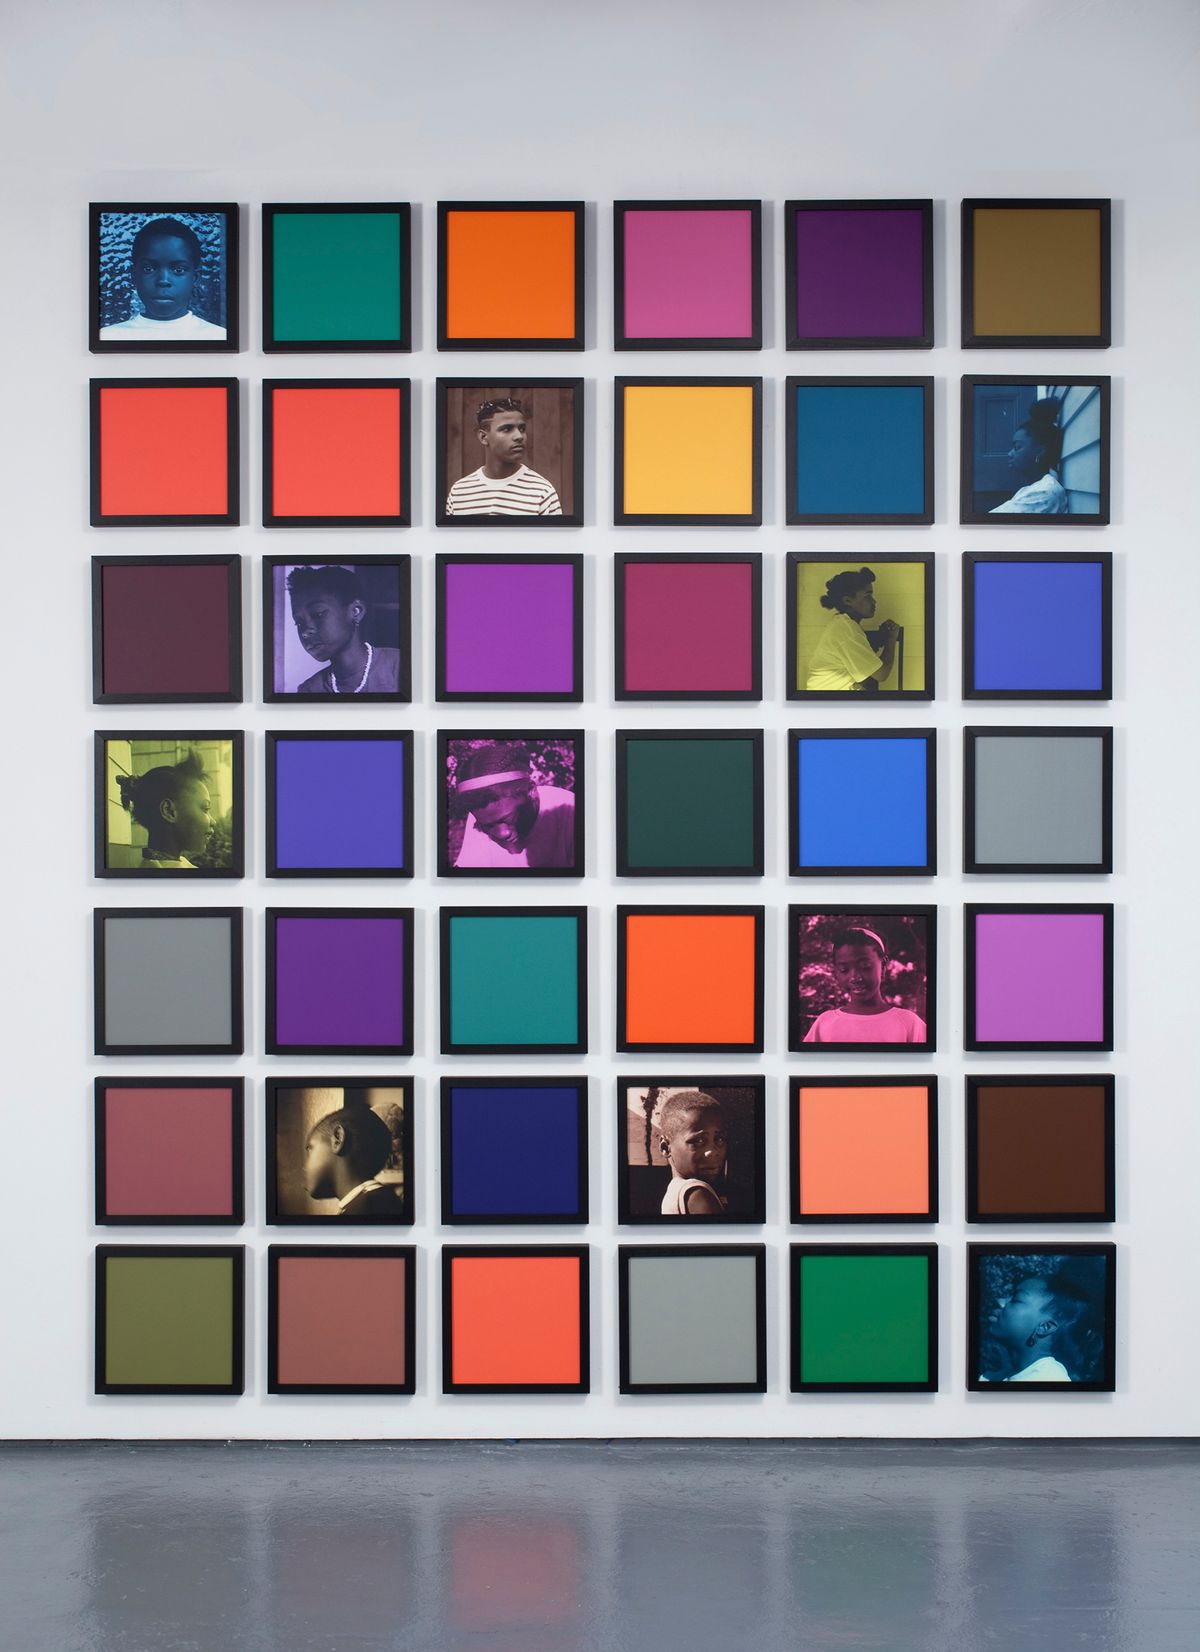 Carrie Mae Weems's Colored People Grid (2009-10) Photo: Jack Shainman Gallery, NY